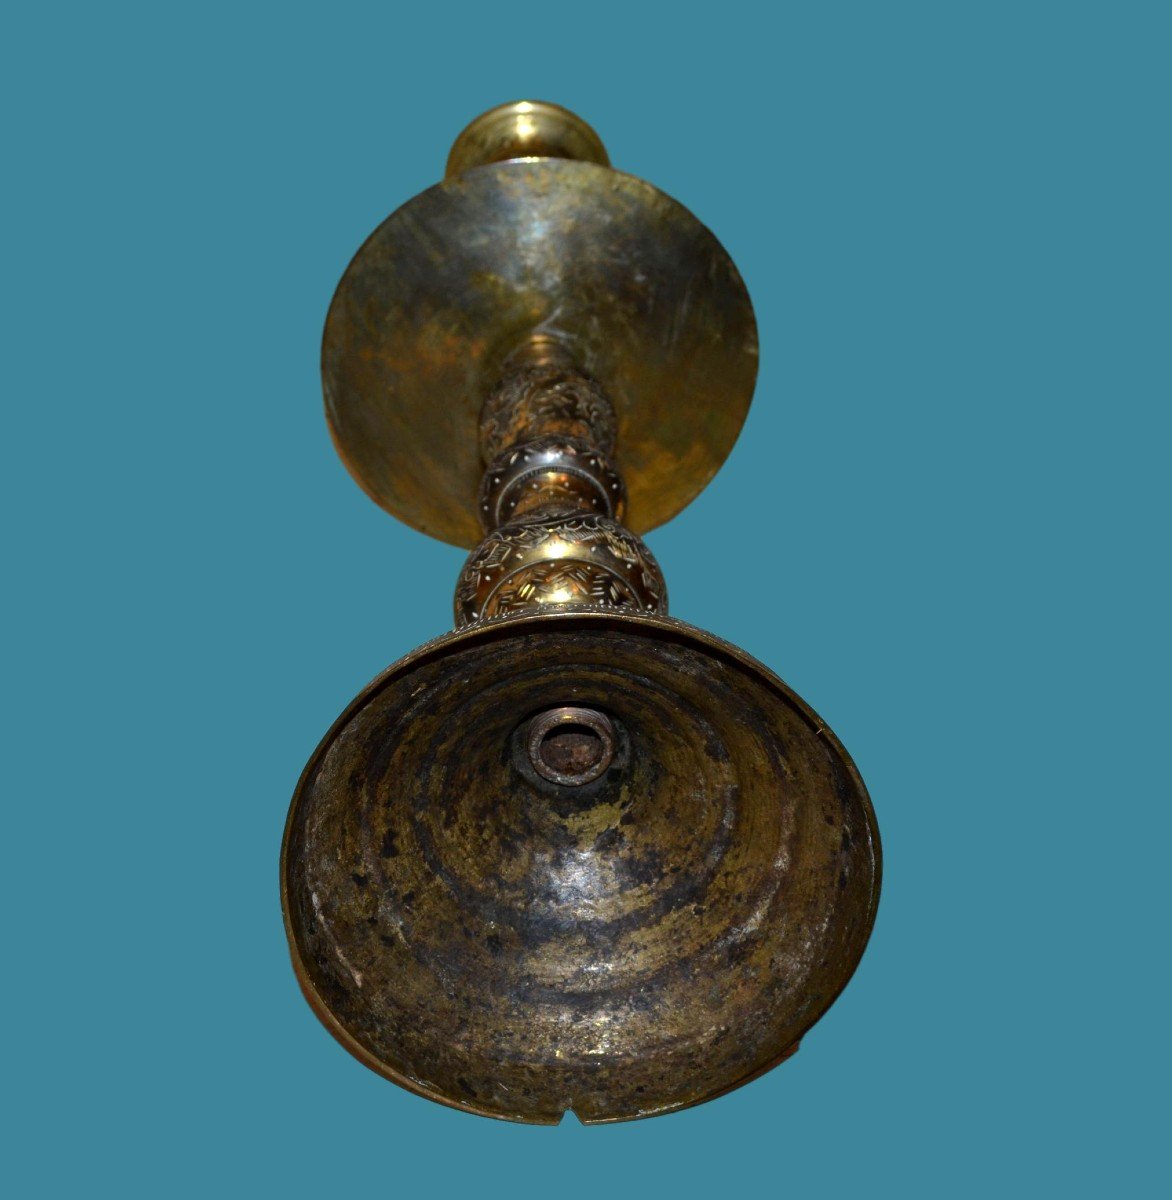 Large Ottoman Candlestick, Ht 48cm, Turkey, Chiseled Gilded Bronze Around 1900, Very Good Condition-photo-4